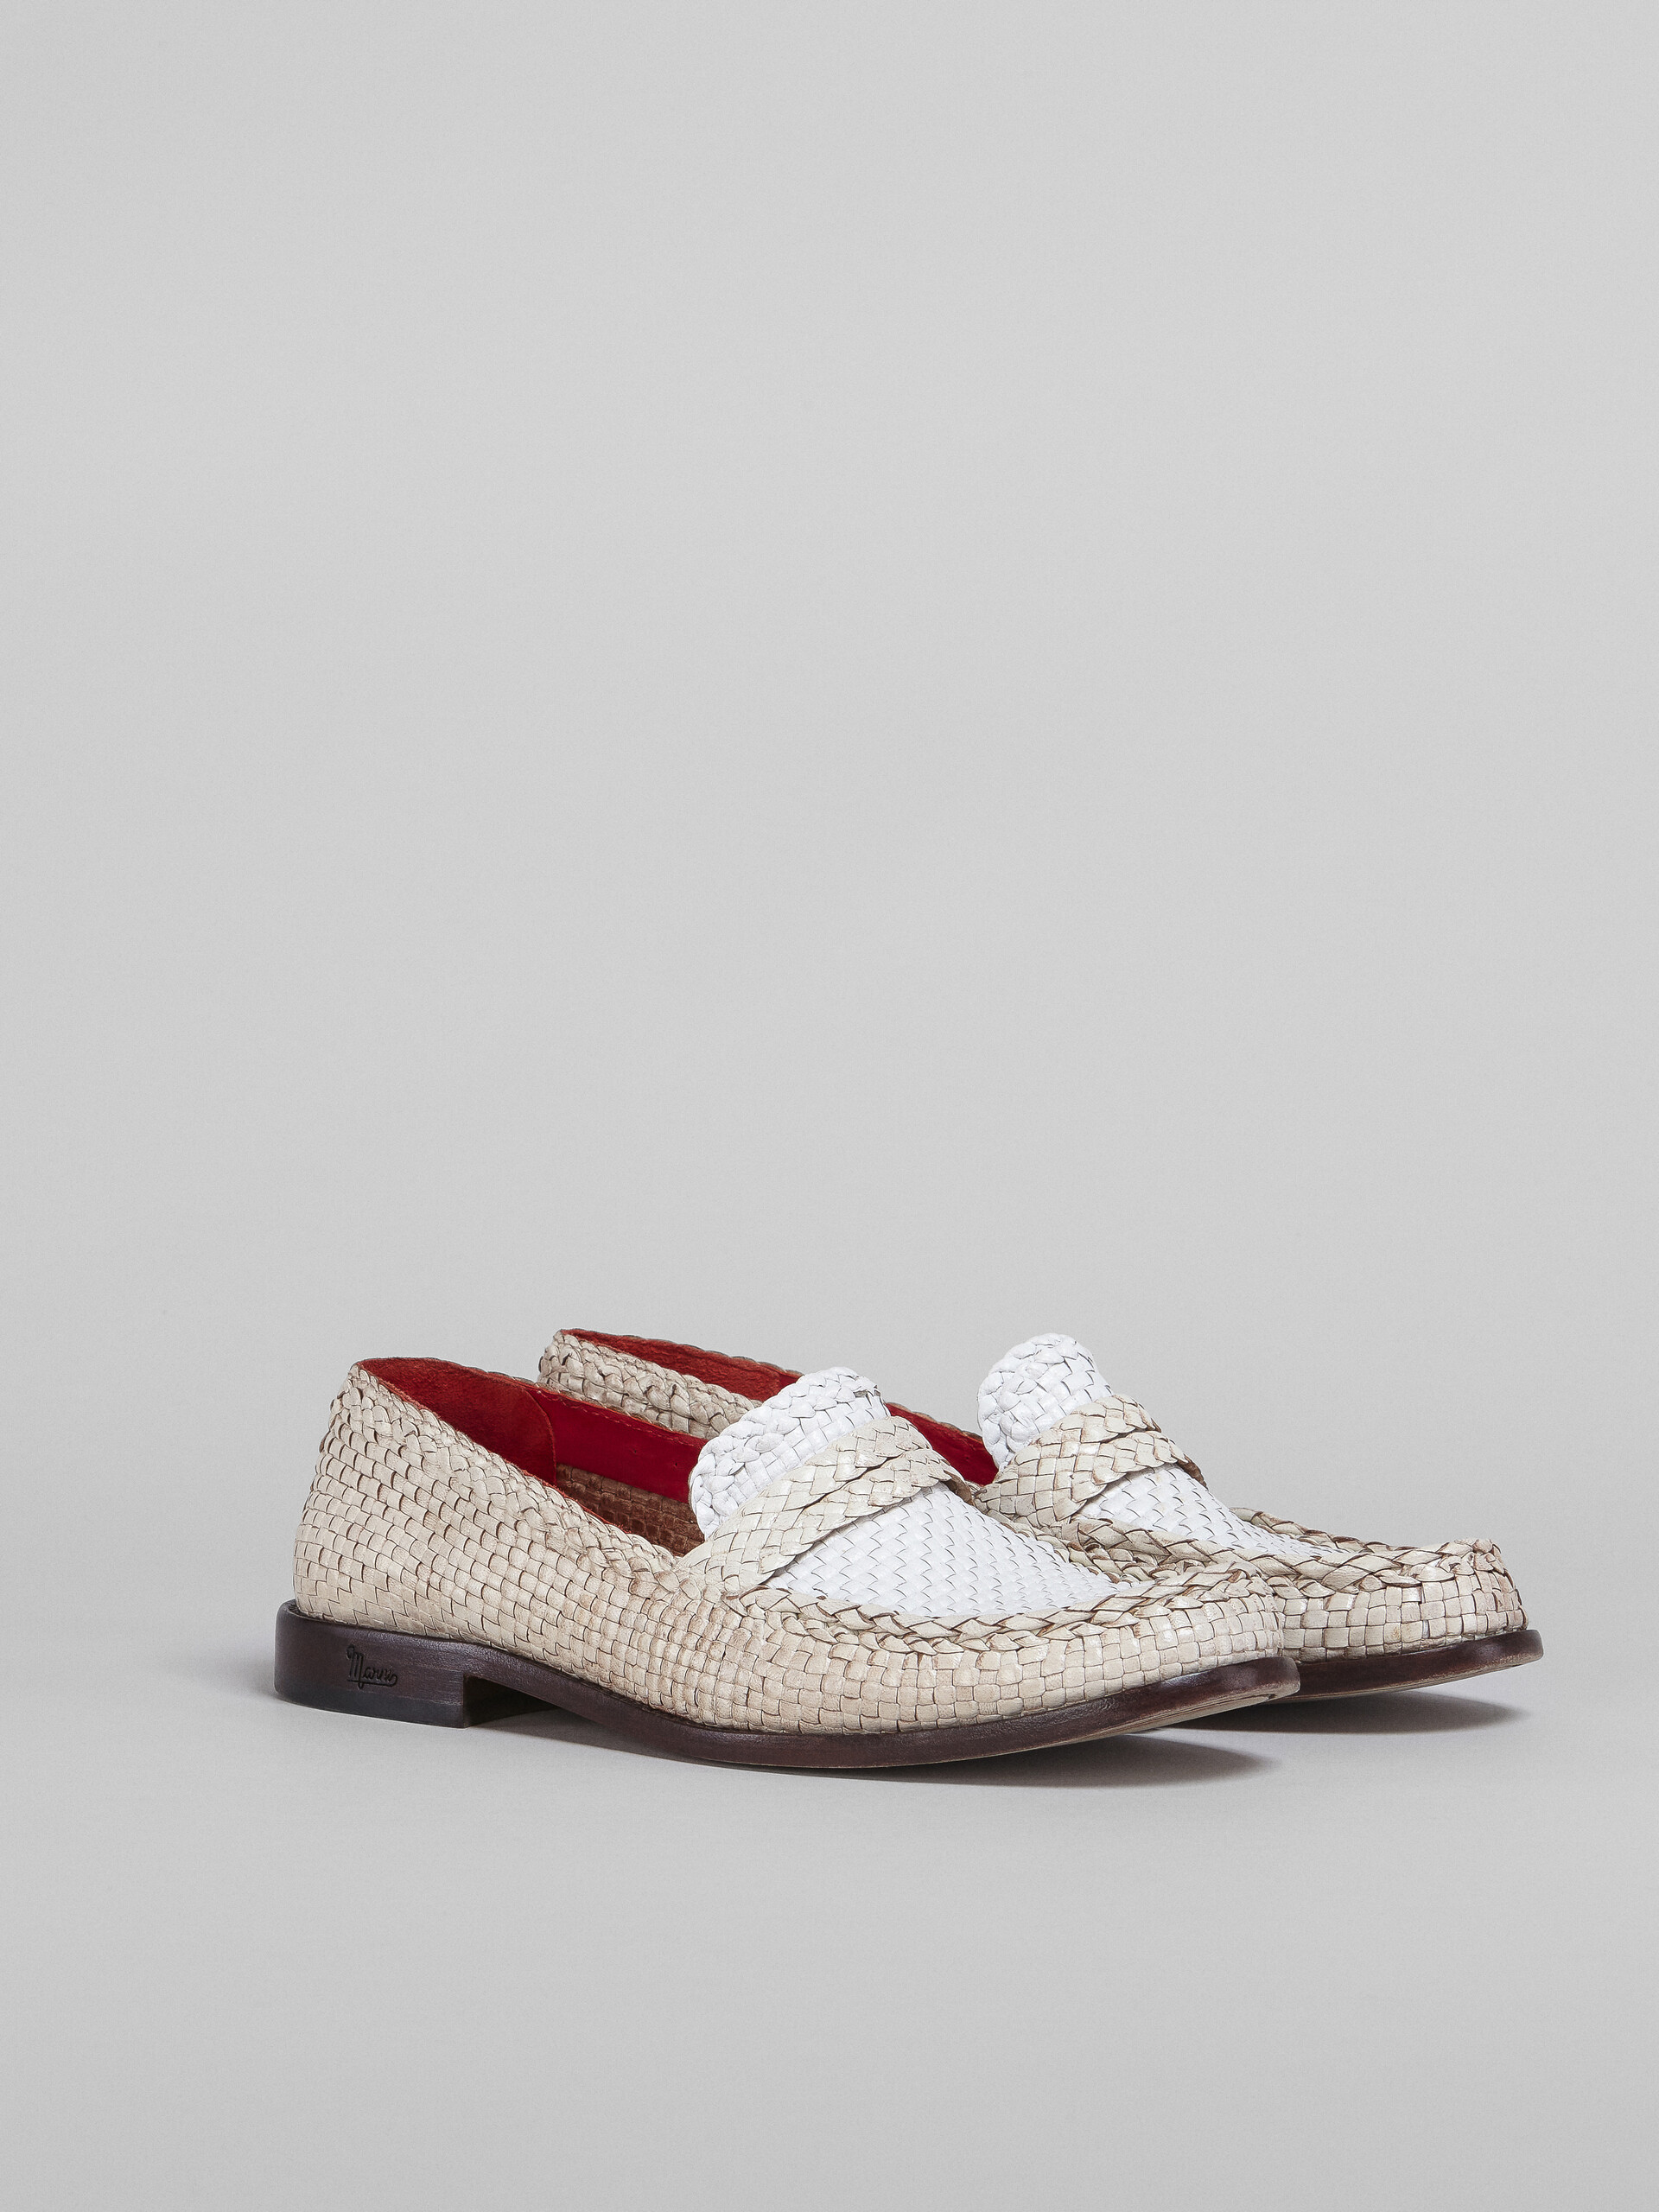 White woven leather moccasin - Mocassin - Image 2